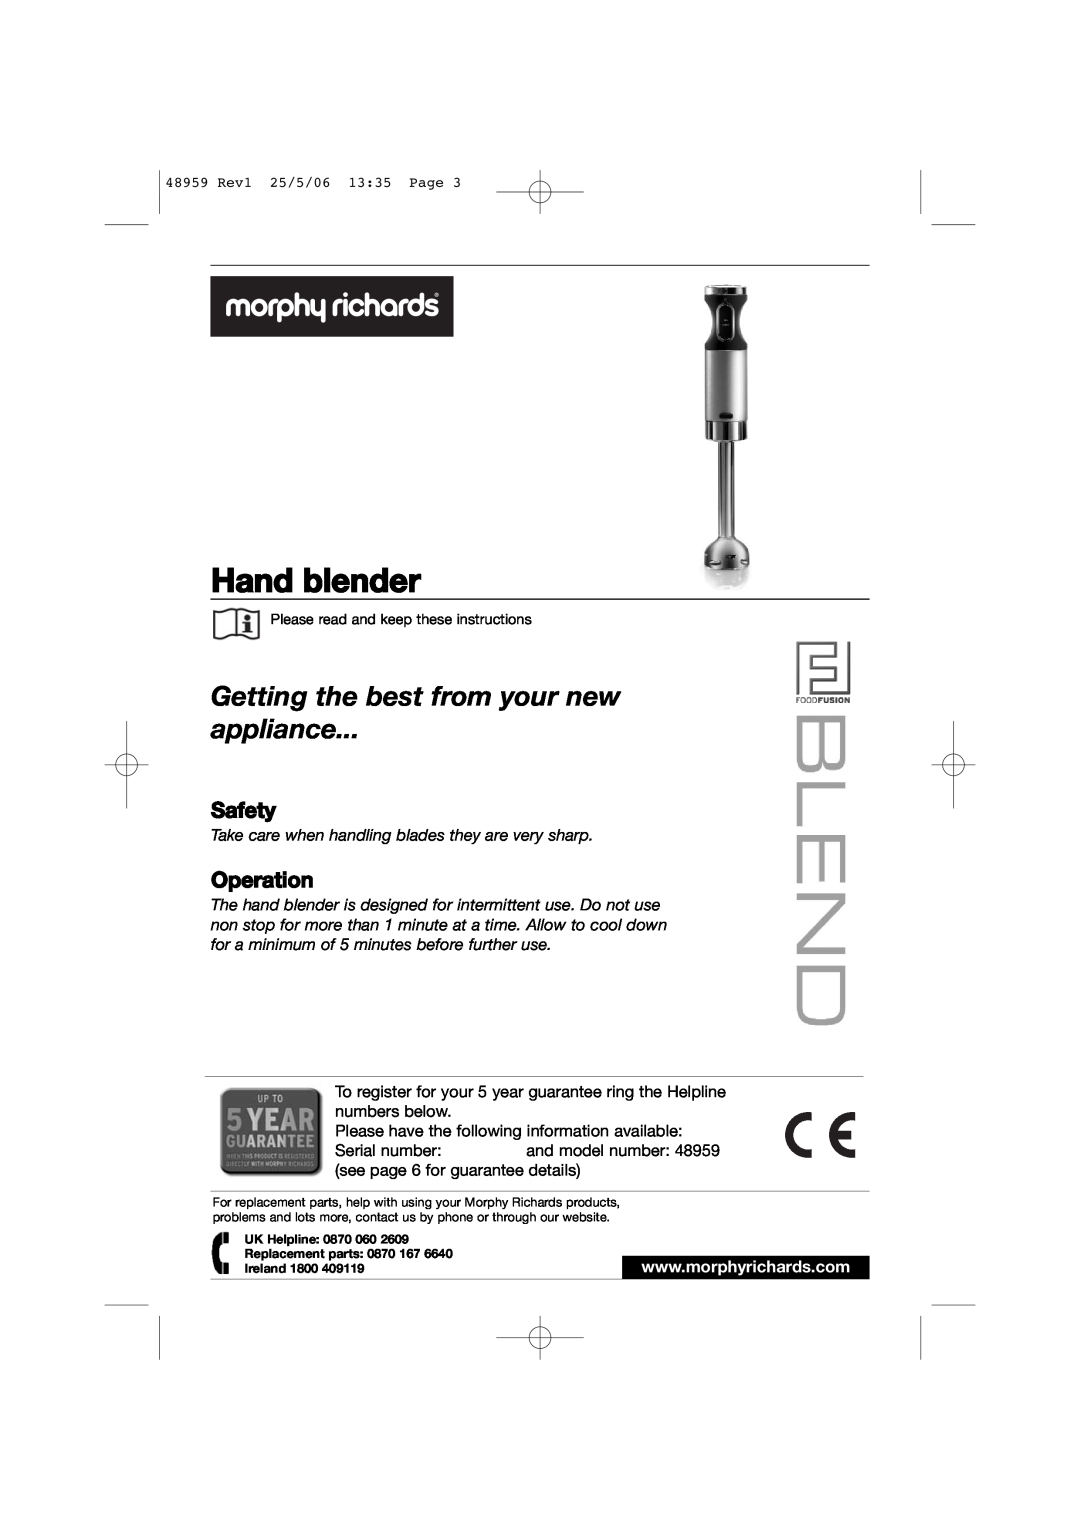 Morphy Richards 48959 manual Hand blender, Getting the best from your new appliance, Safety, Operation 